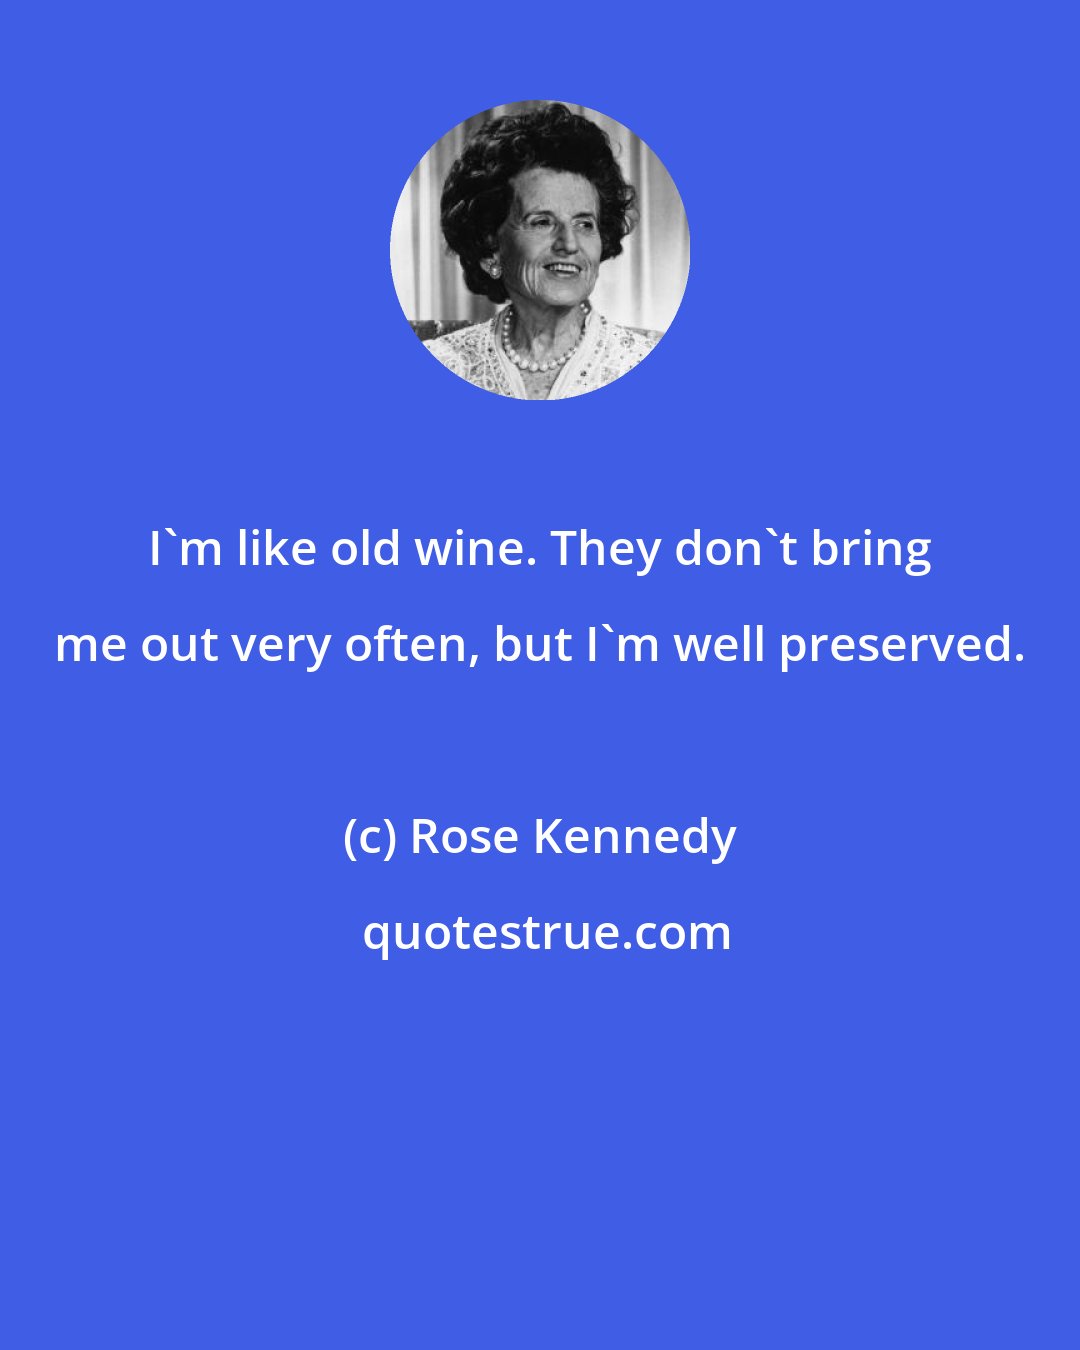 Rose Kennedy: I'm like old wine. They don't bring me out very often, but I'm well preserved.